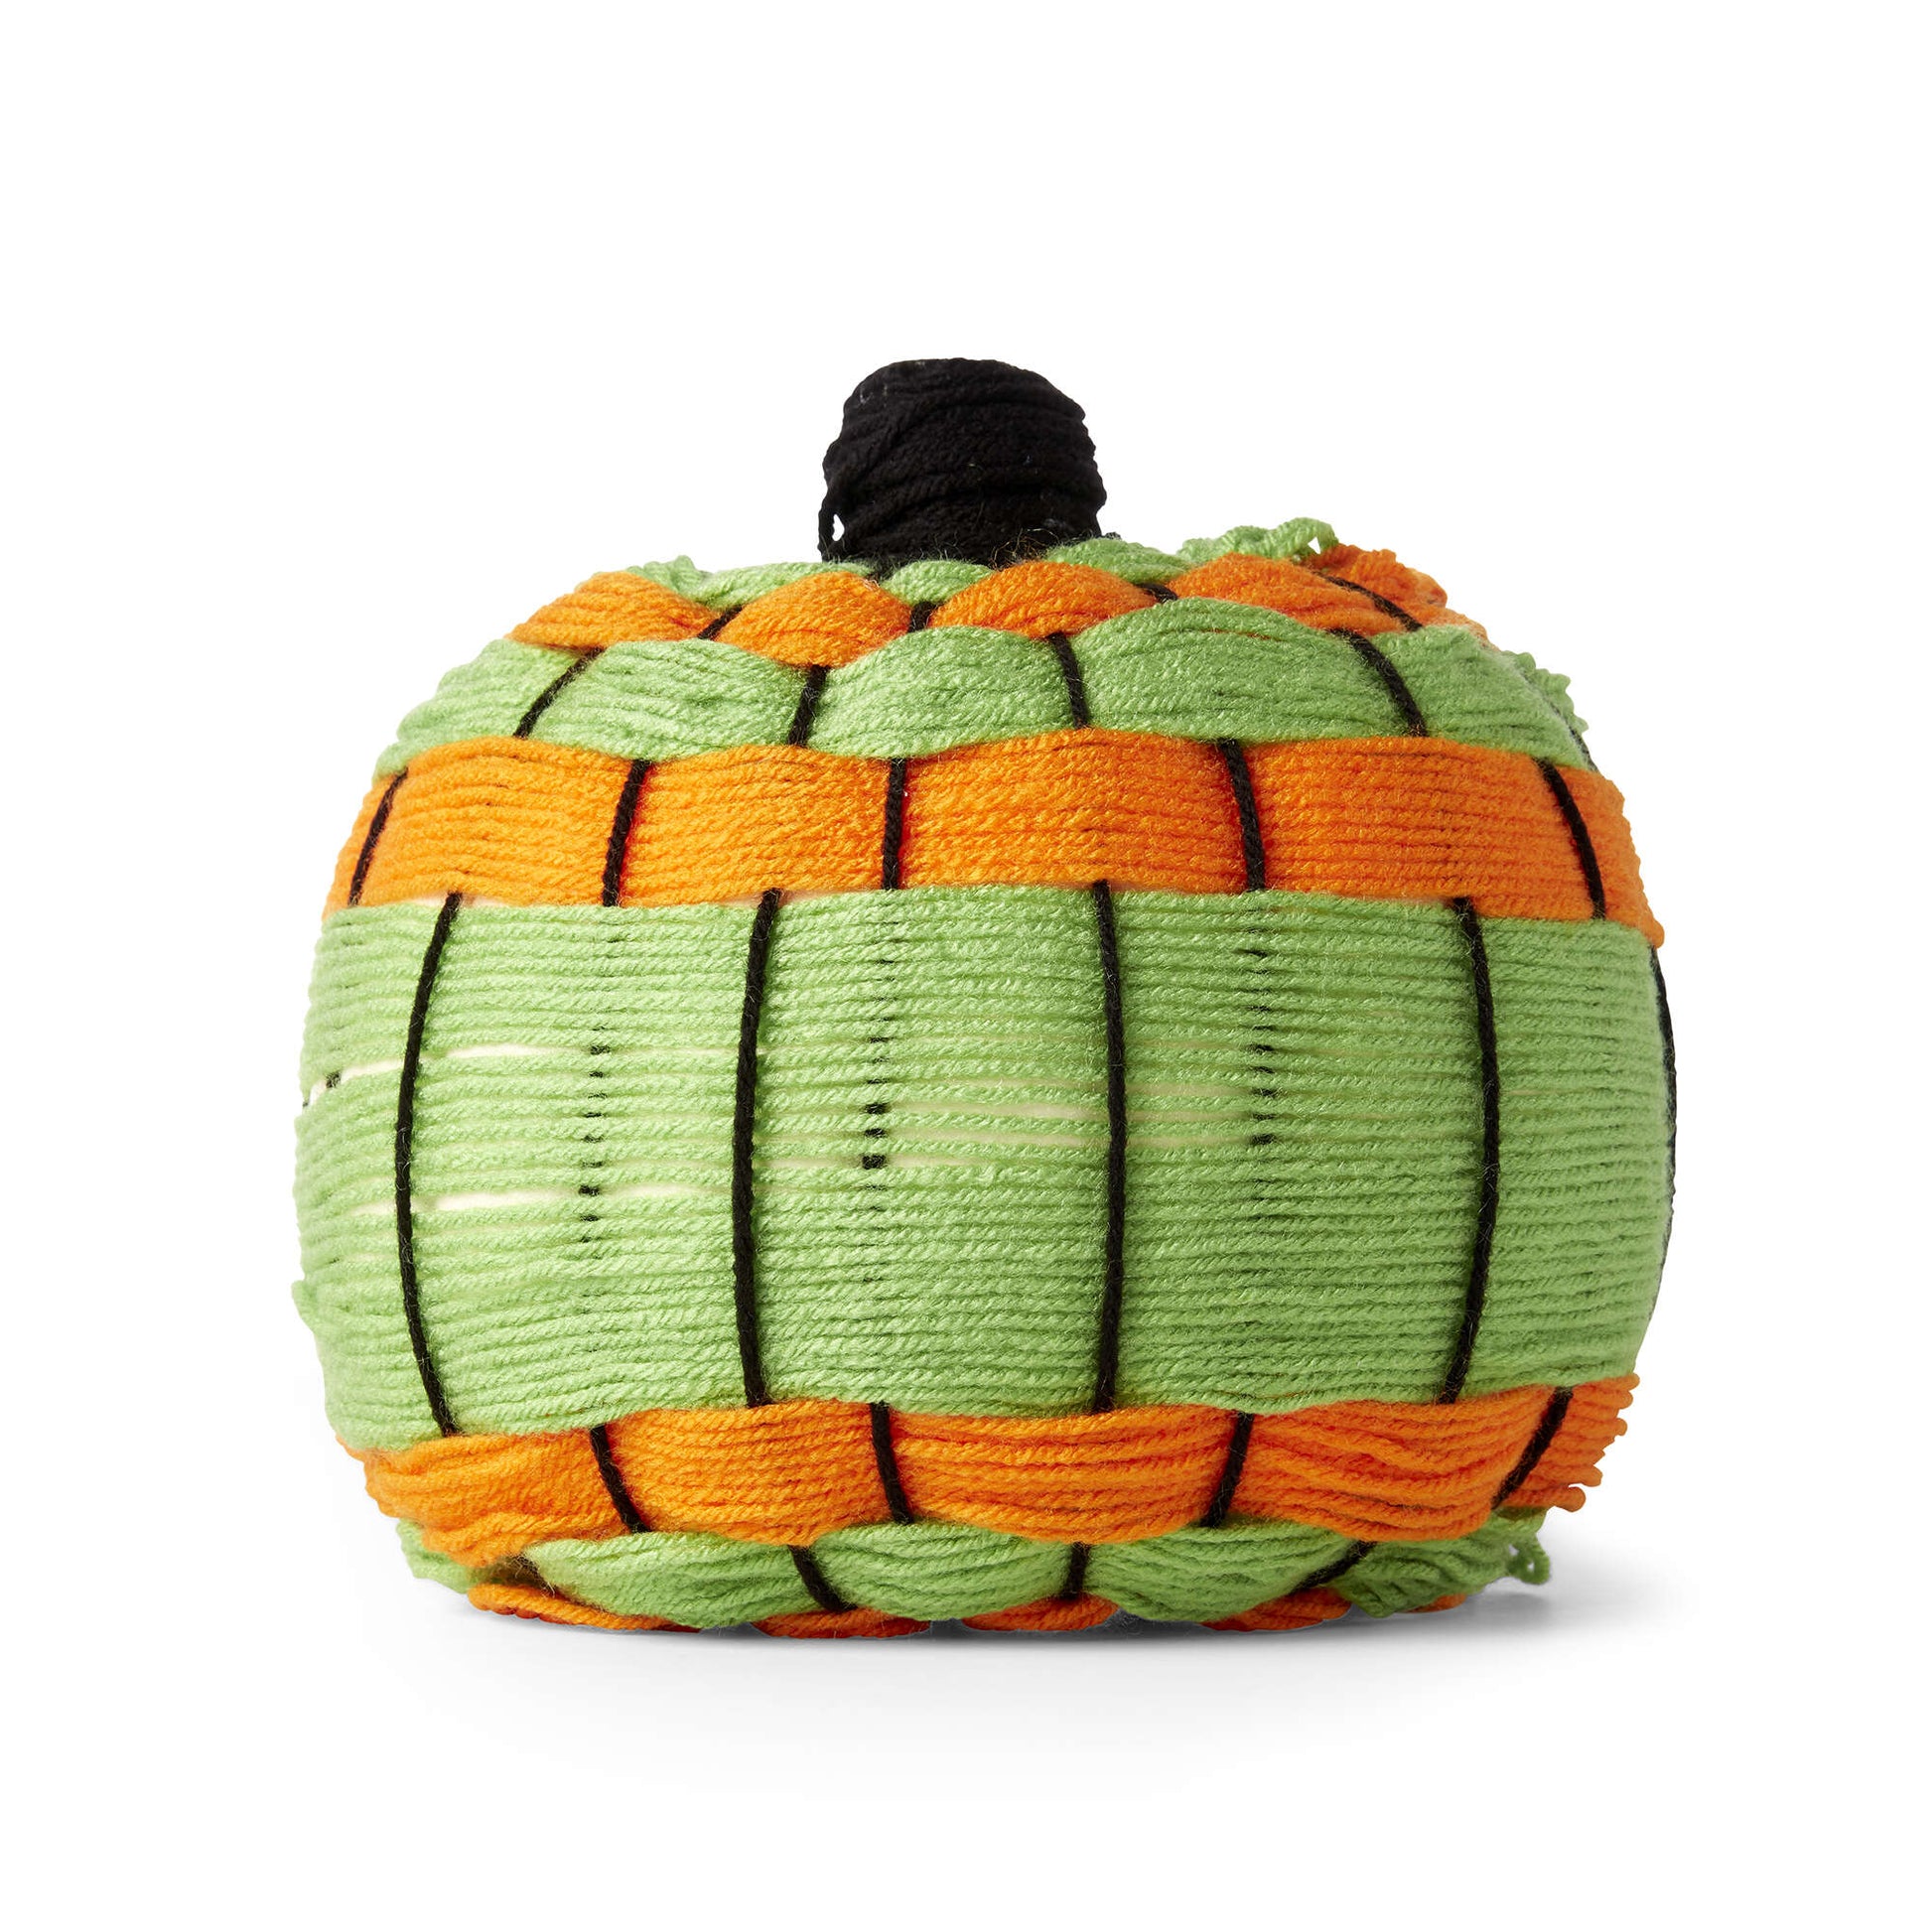 Free Red Heart Hand Woven Yarn Wrapped Pumpkin Craft Pattern